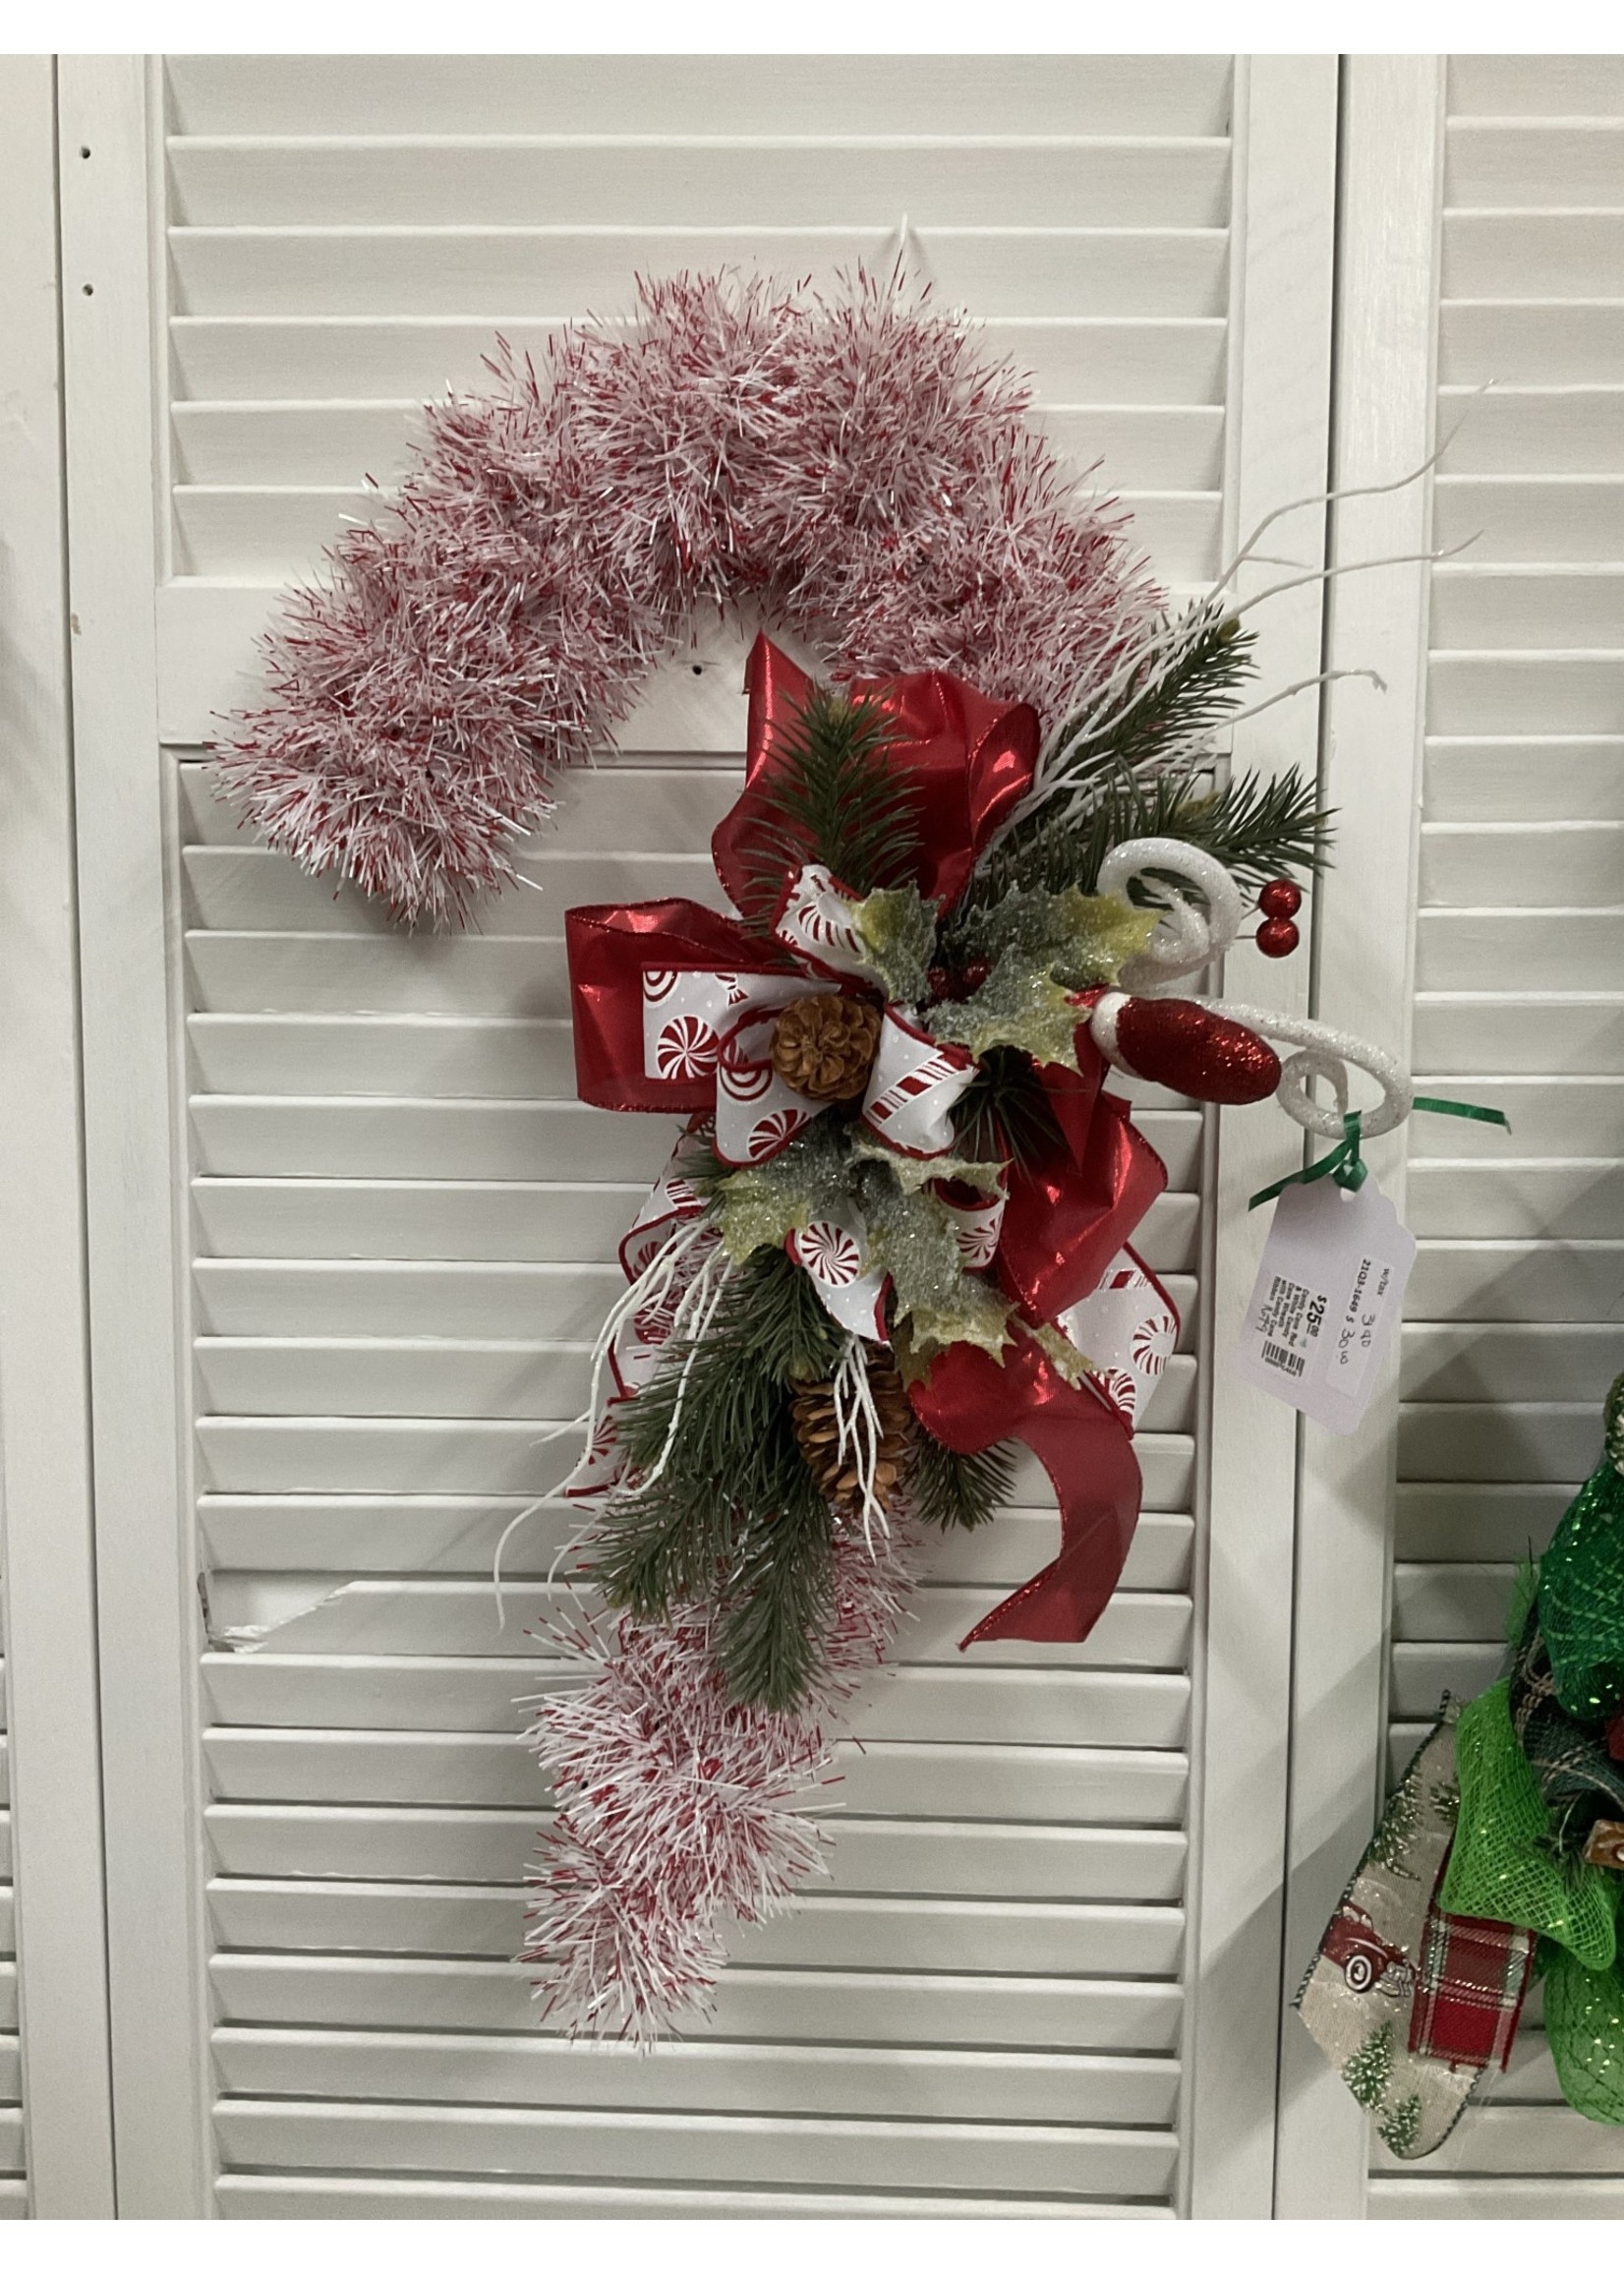 My New Favorite Thing Wreath Candy Cane Red & White with Peppermint Candy Ribbon